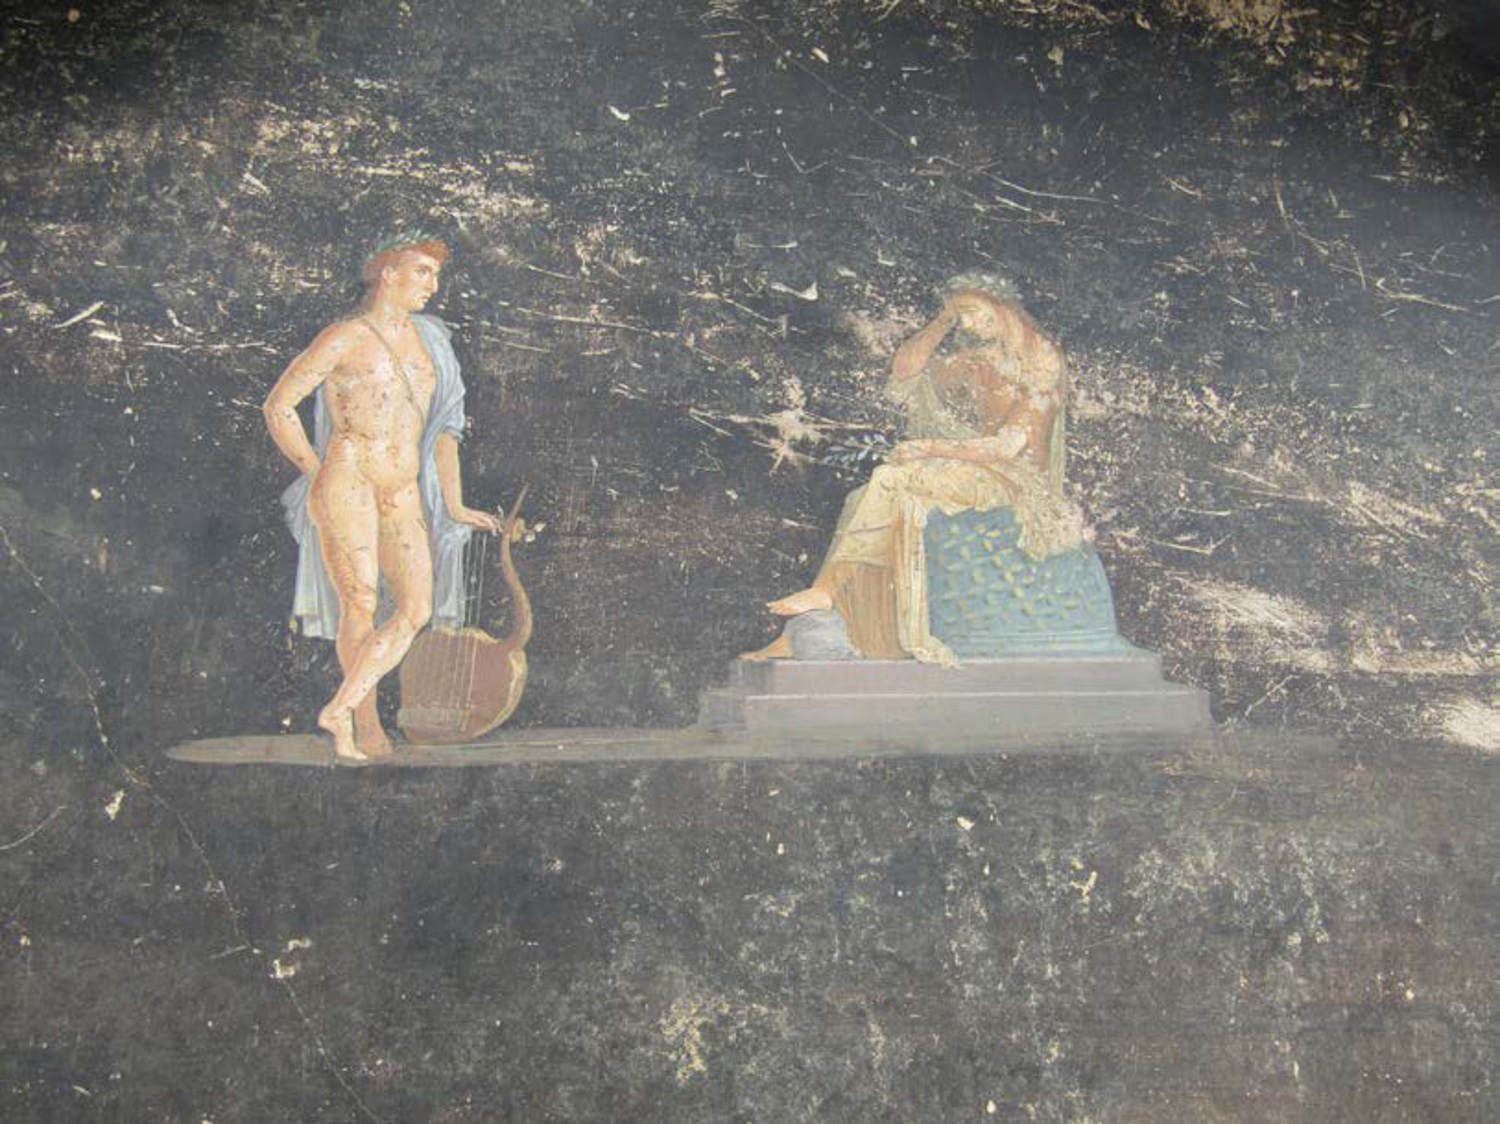 striking roman paintings uncovered in pompeii after nearly 2,000 years